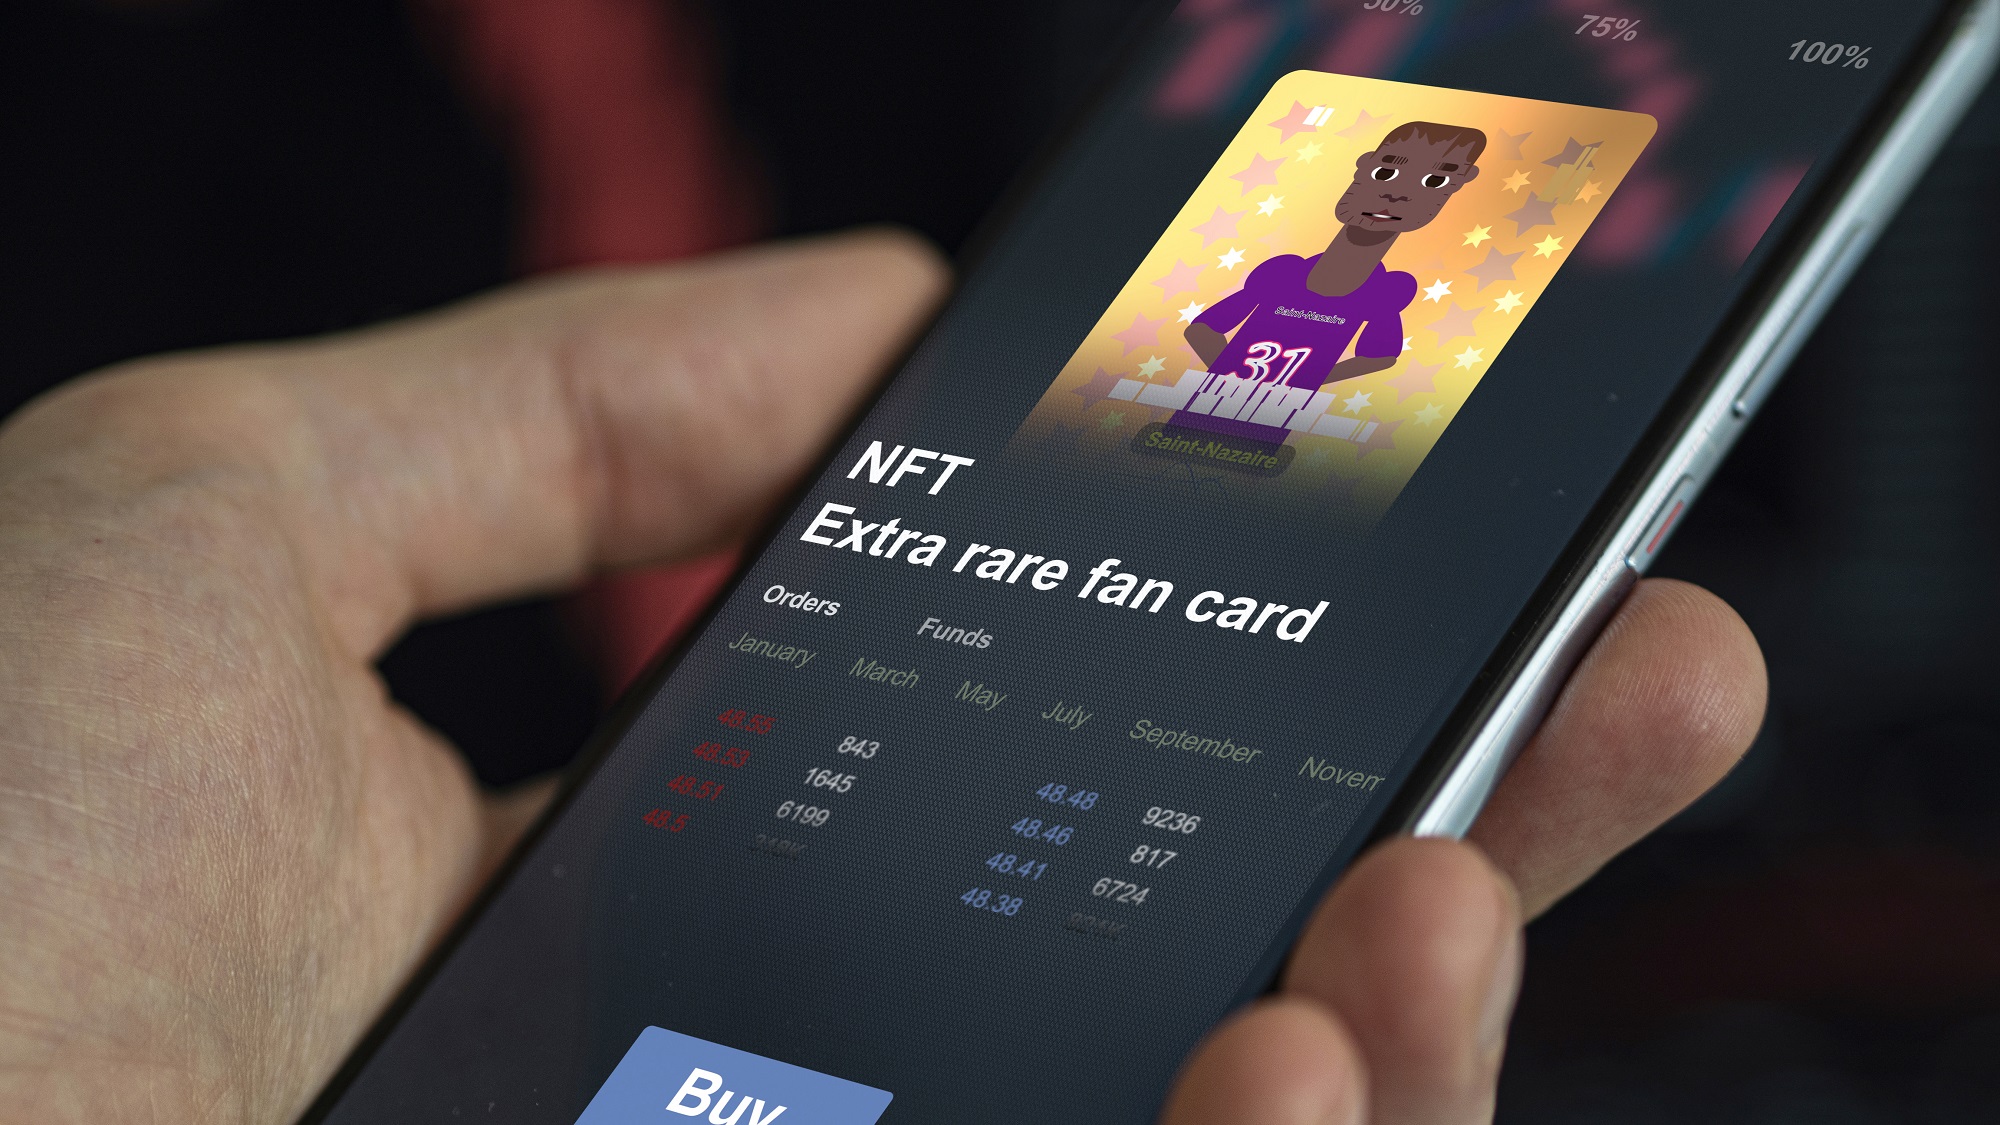 A smartphone user holds a device with an image of a sports player on it. Text reading &ldquo;NFT Extra Rare Fan Card&rdquo; is displayed below the image, along with a &ldquo;Buy&rdquo; button.